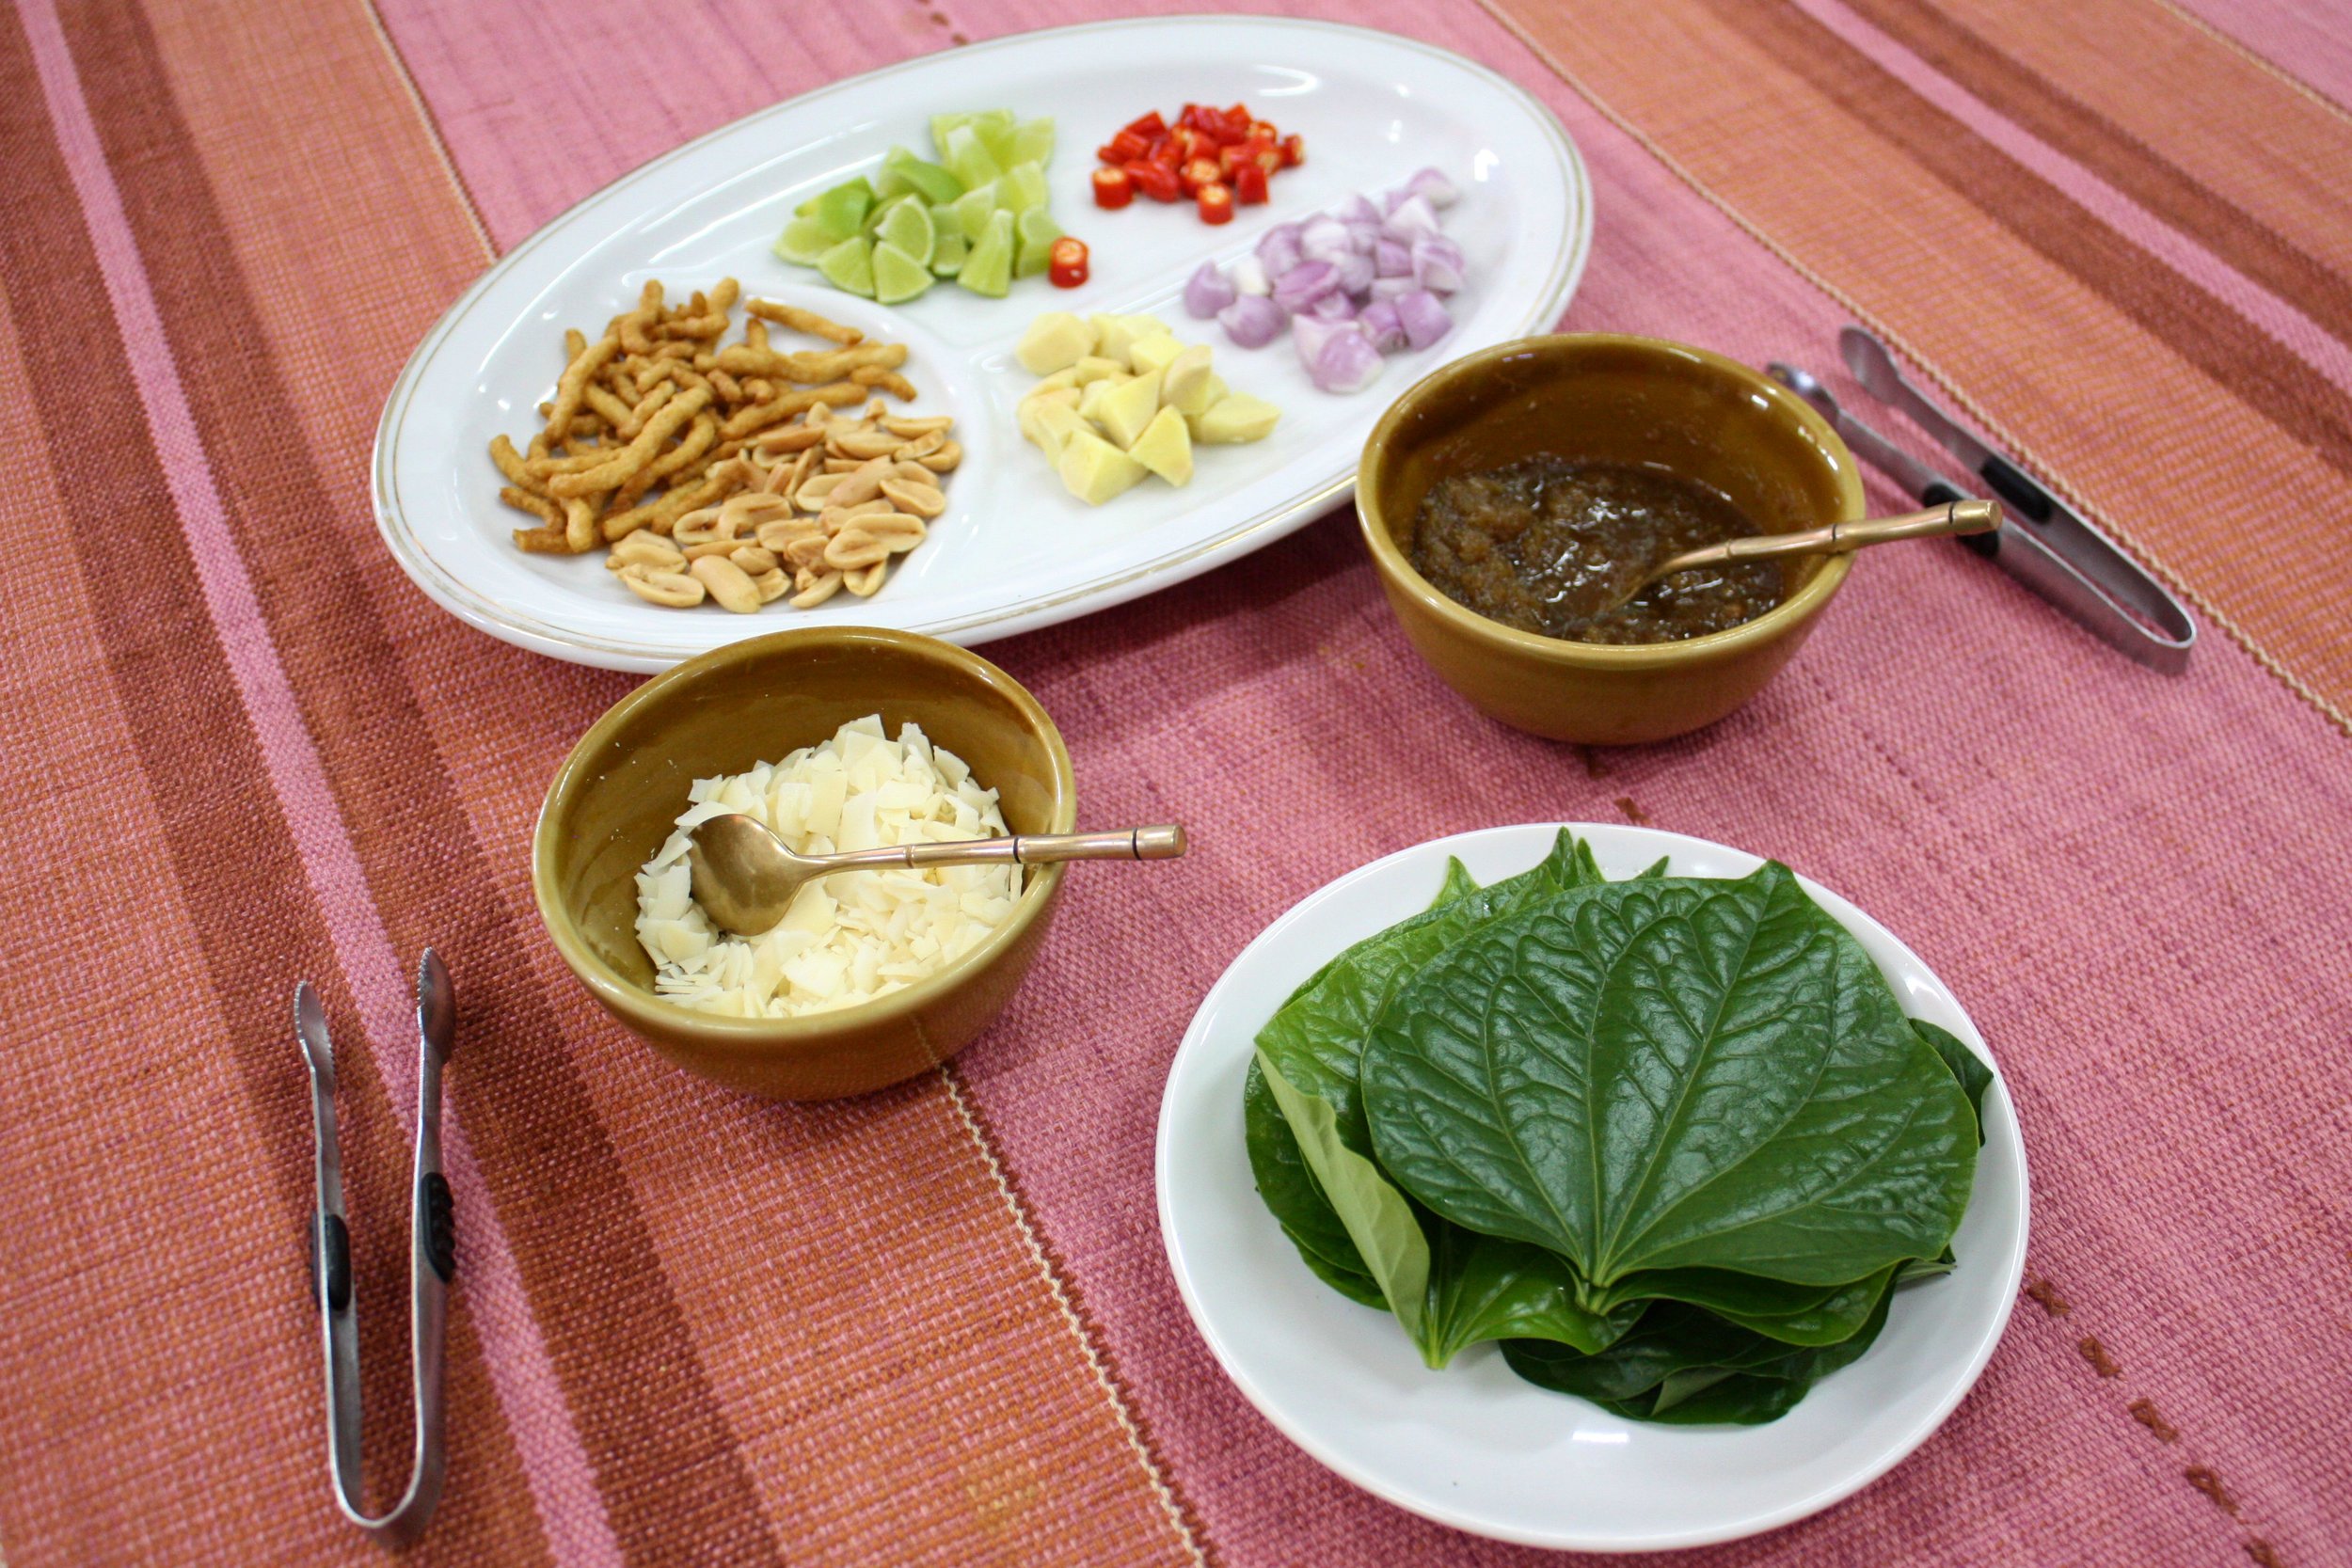  Pea welcomed us with Miang Kham, a popular Thai snack.&nbsp; 